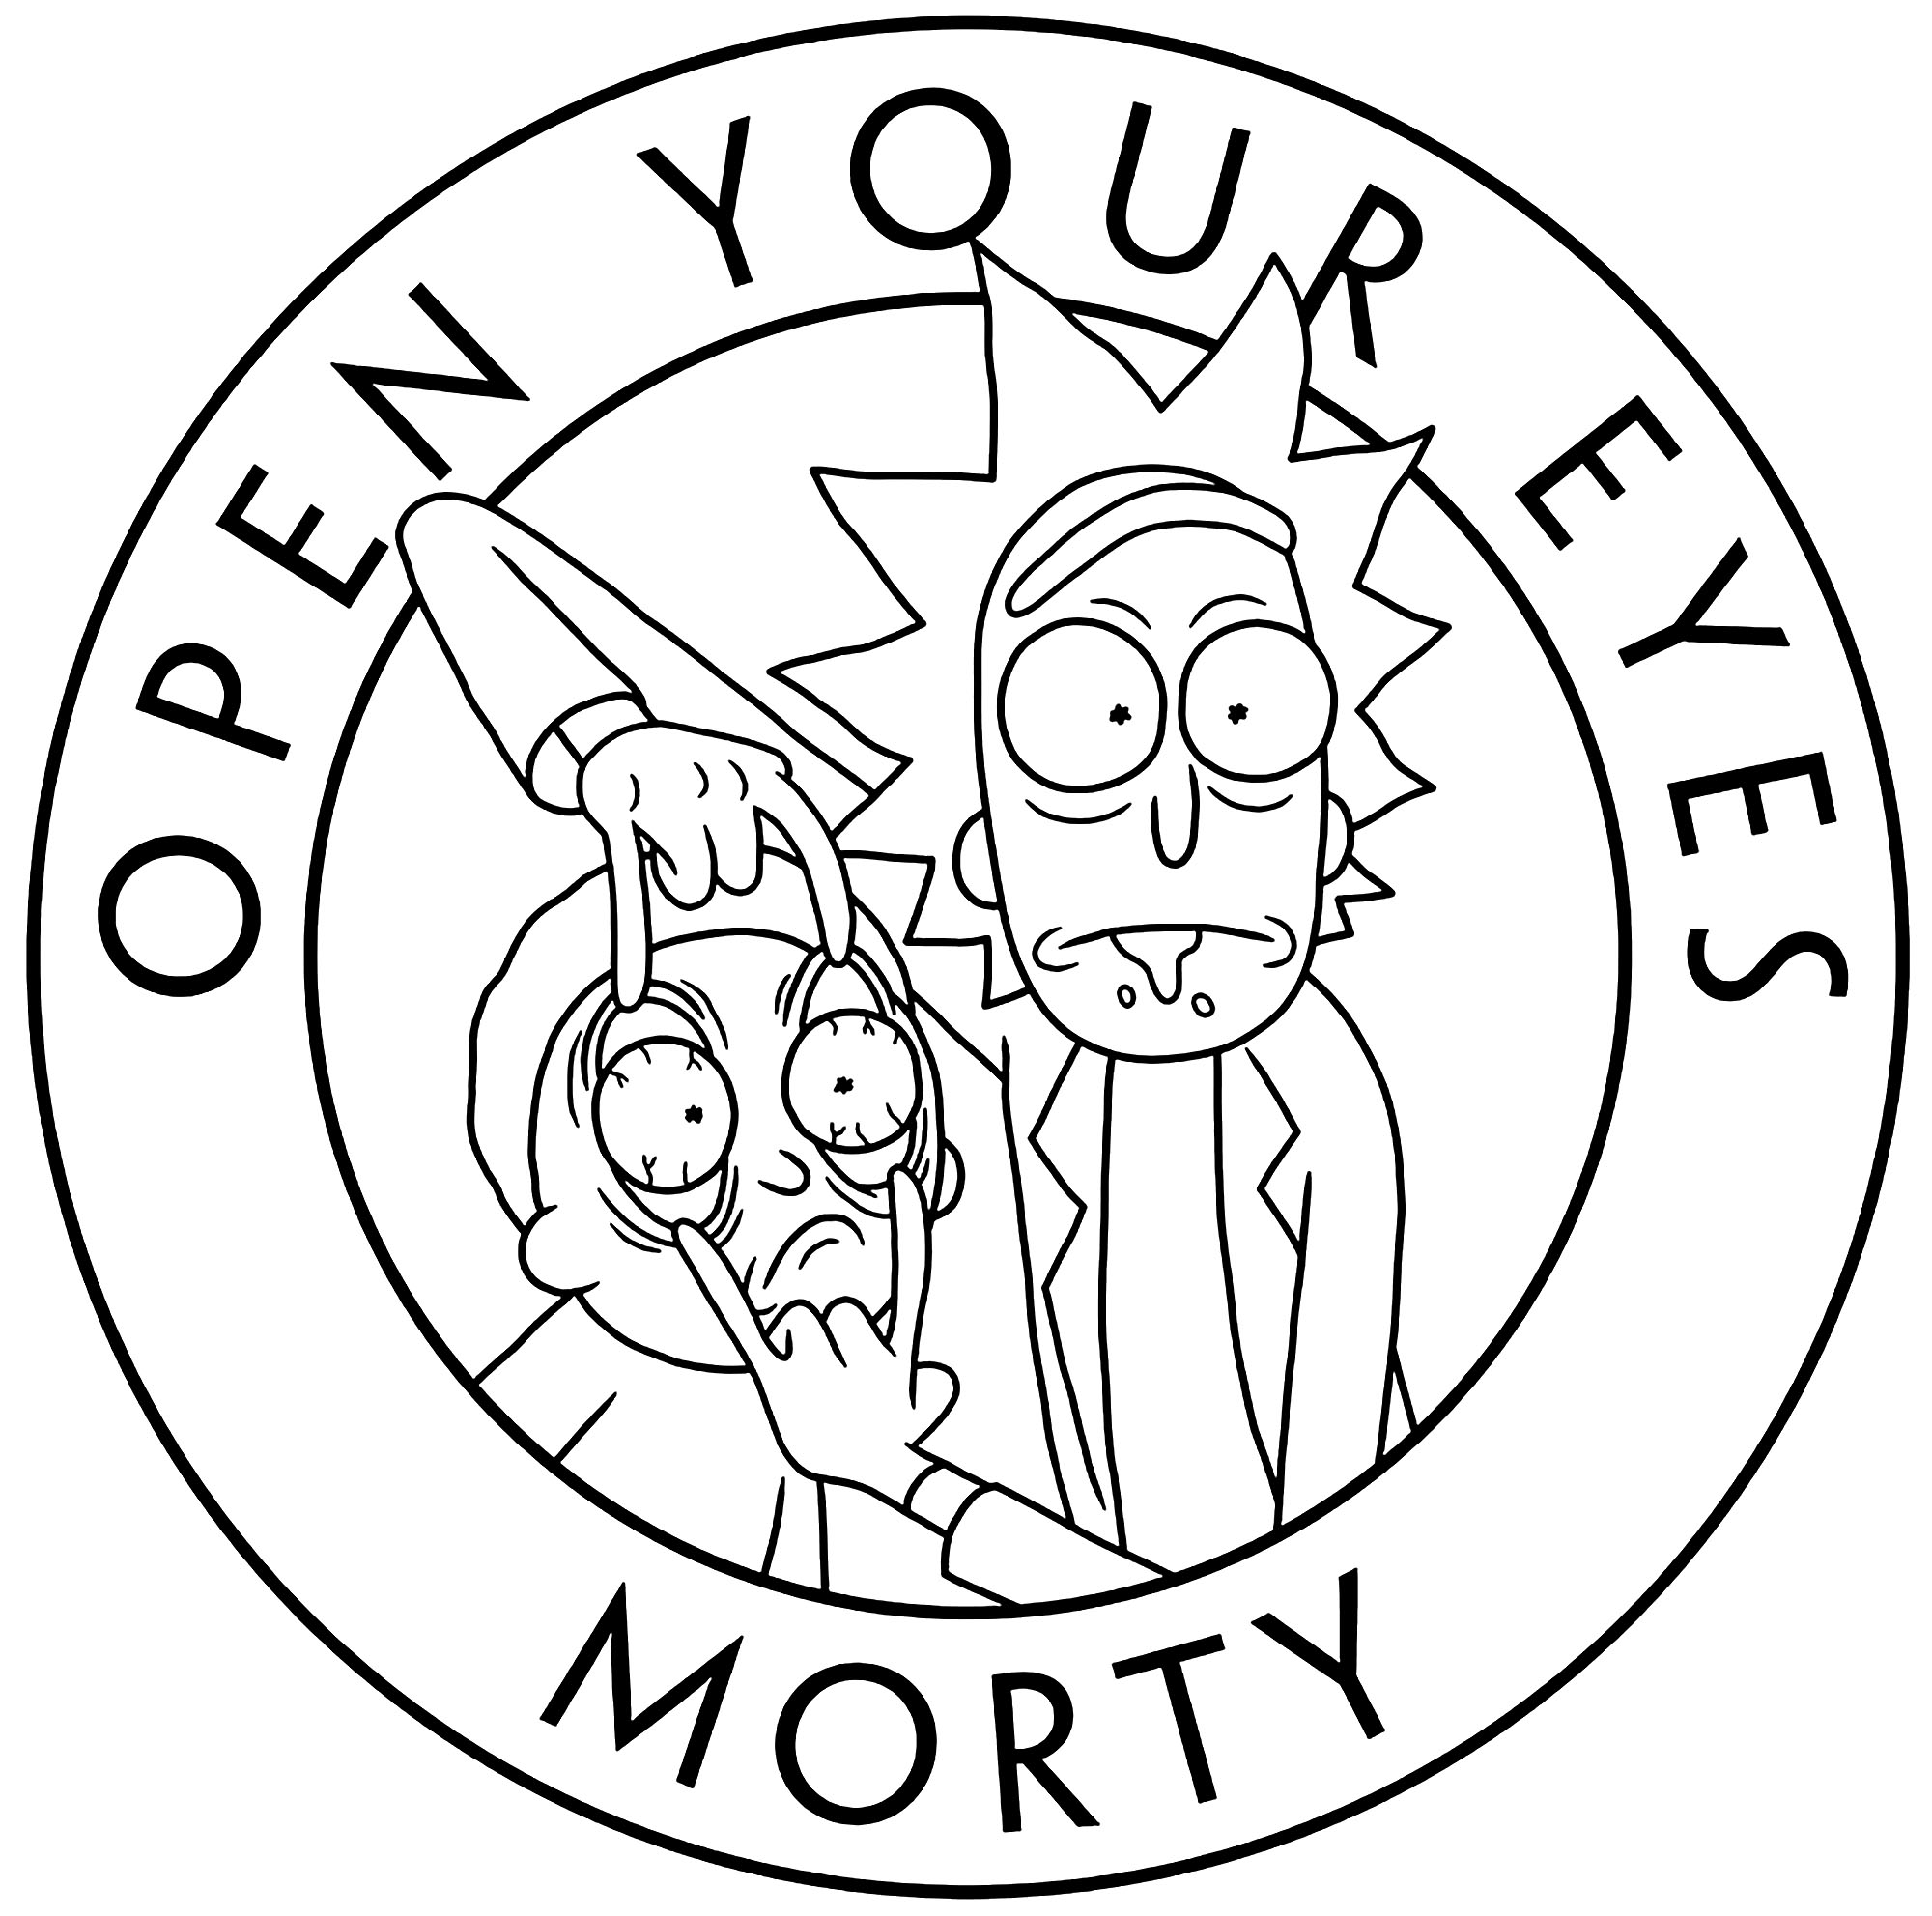 Printable Rick and Morty Open Your Eyes Morty Coloring Page for kids.